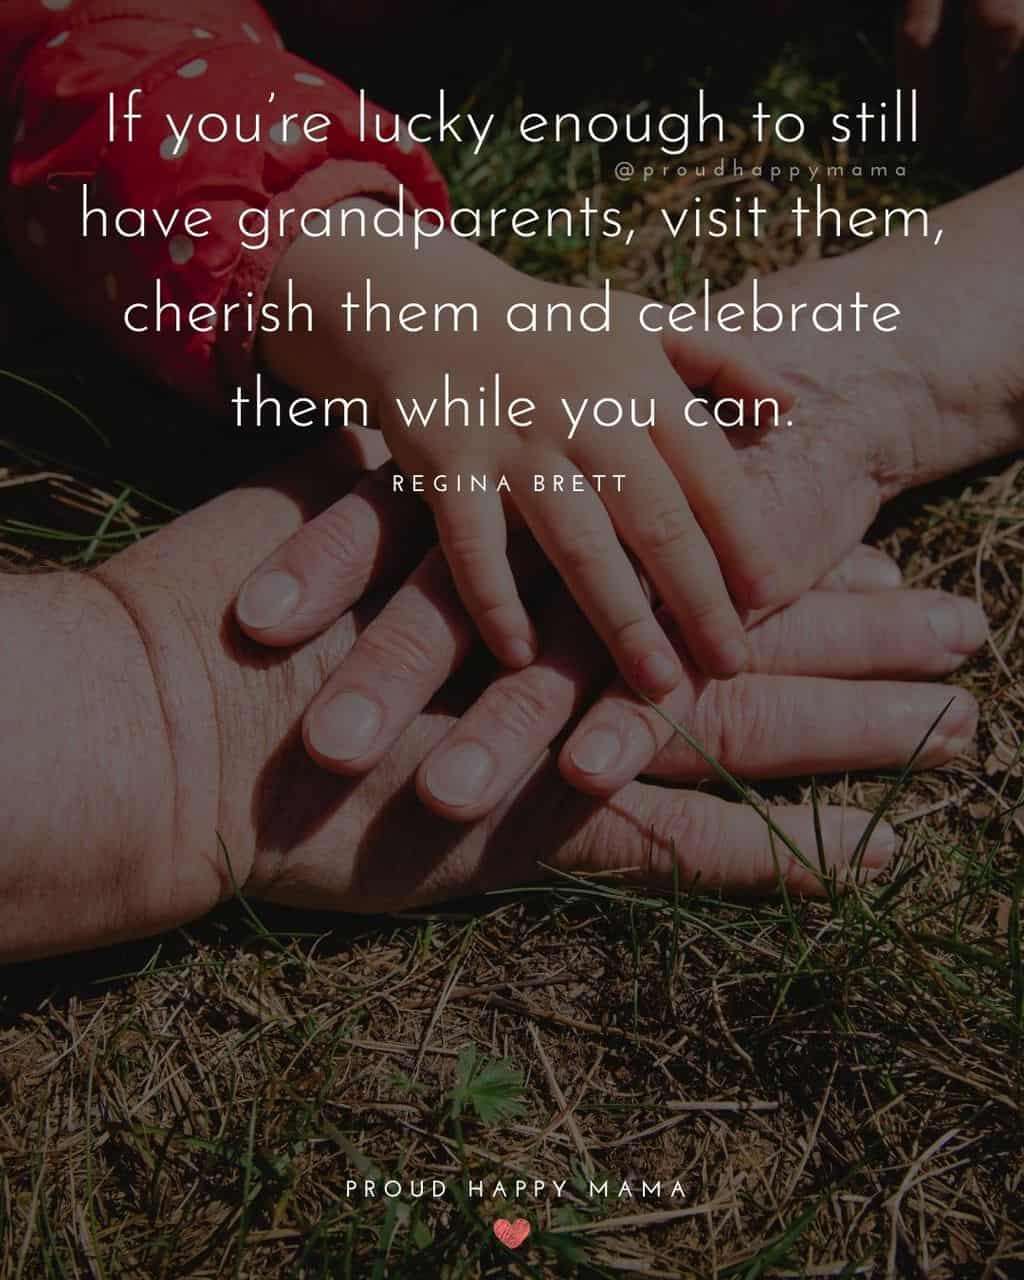 Grandparent Quotes – If you’re lucky enough to still have grandparents, visit them, cherish them and celebrate them while